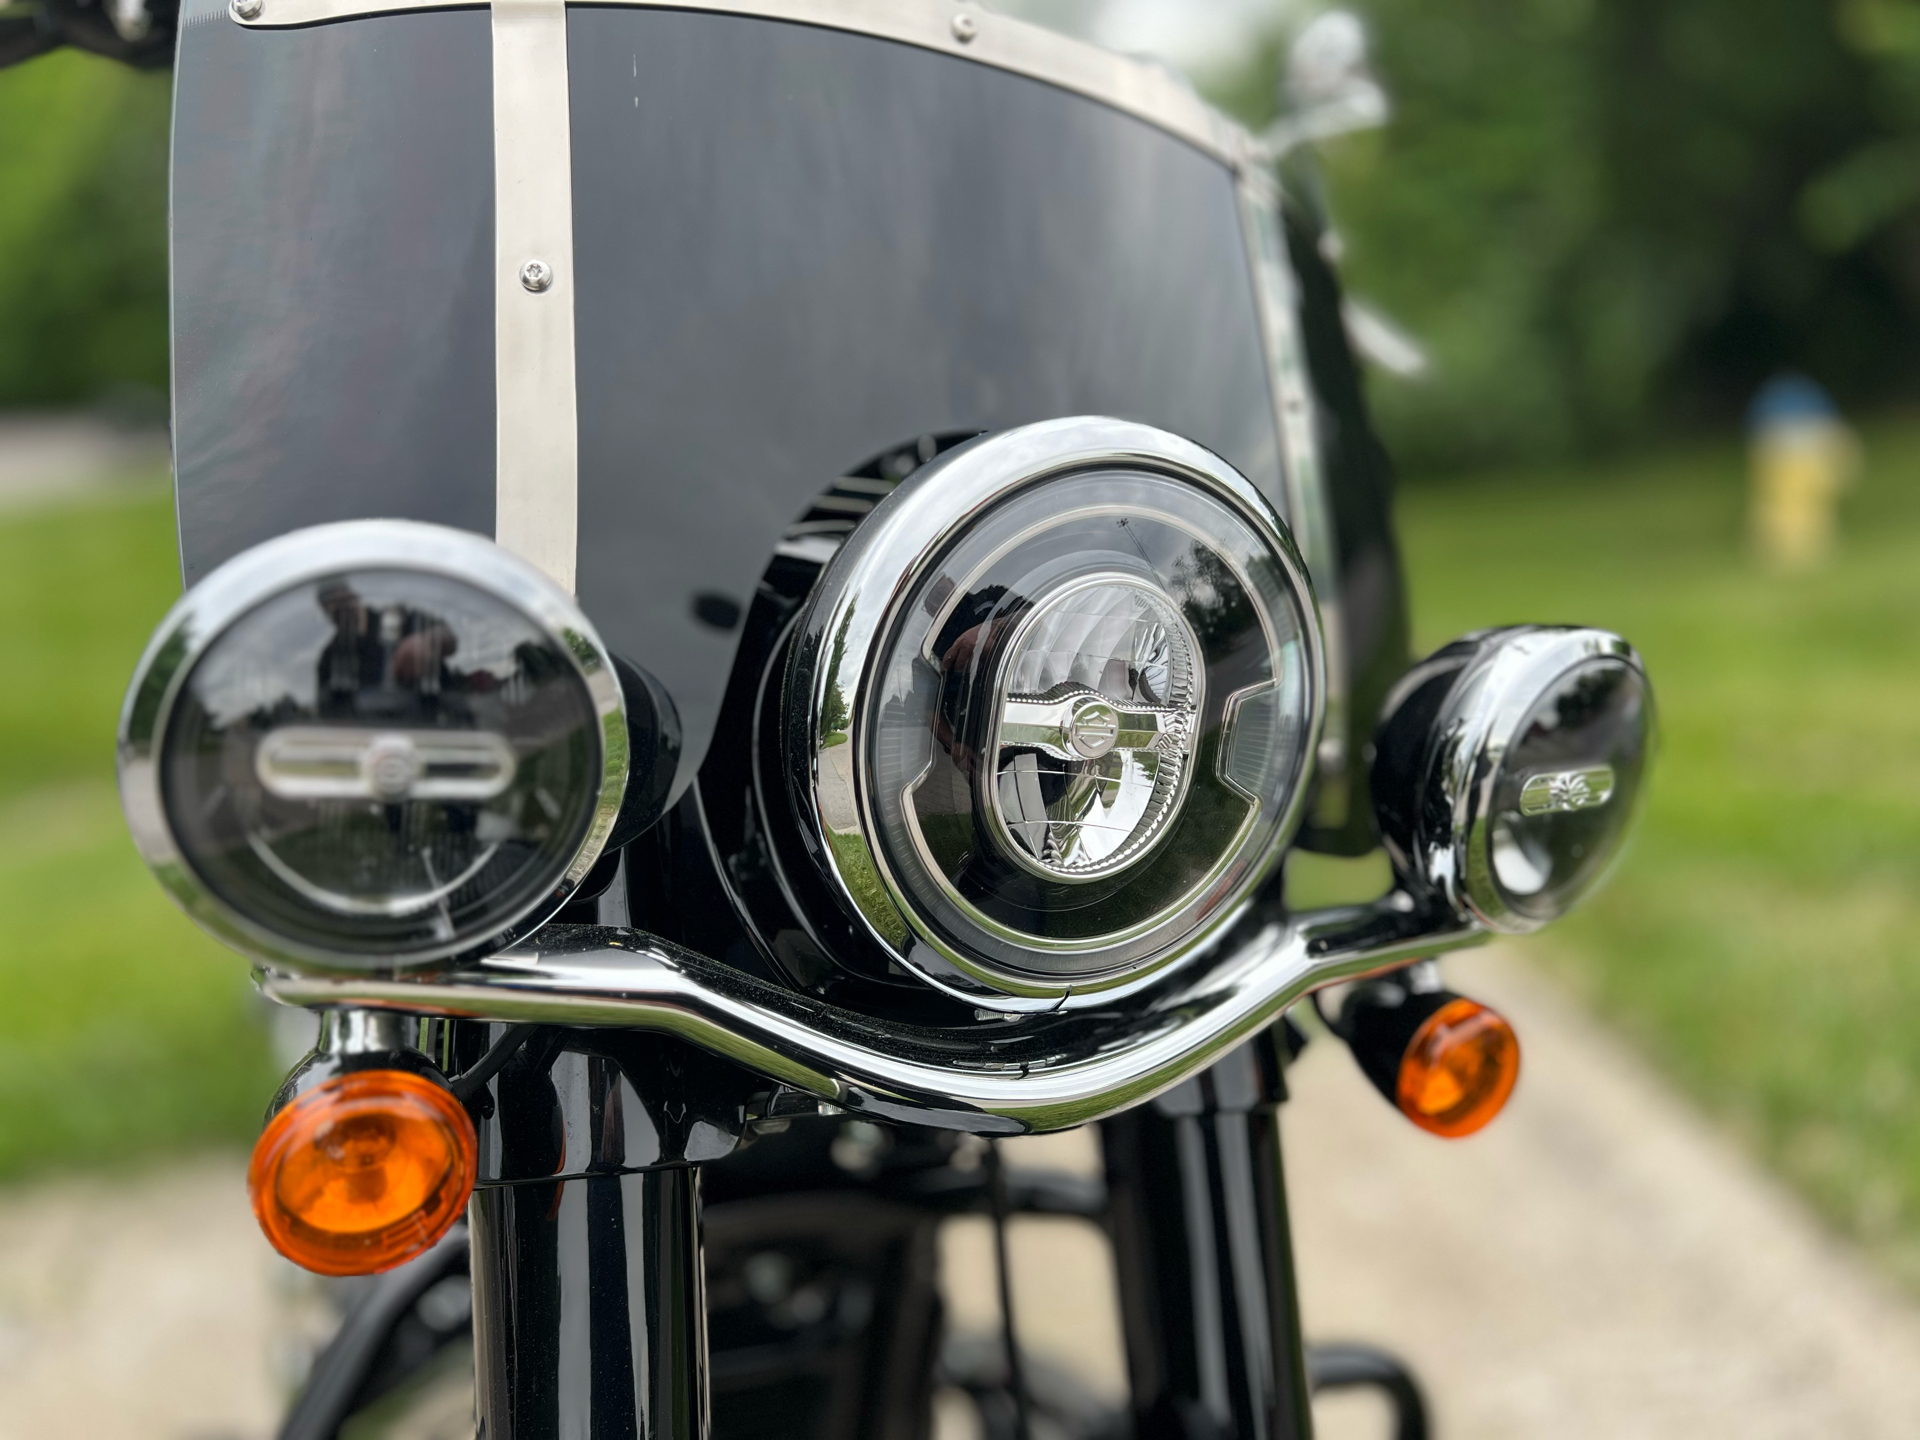 2019 Harley-Davidson Heritage Classic 114 in Franklin, Tennessee - Photo 16